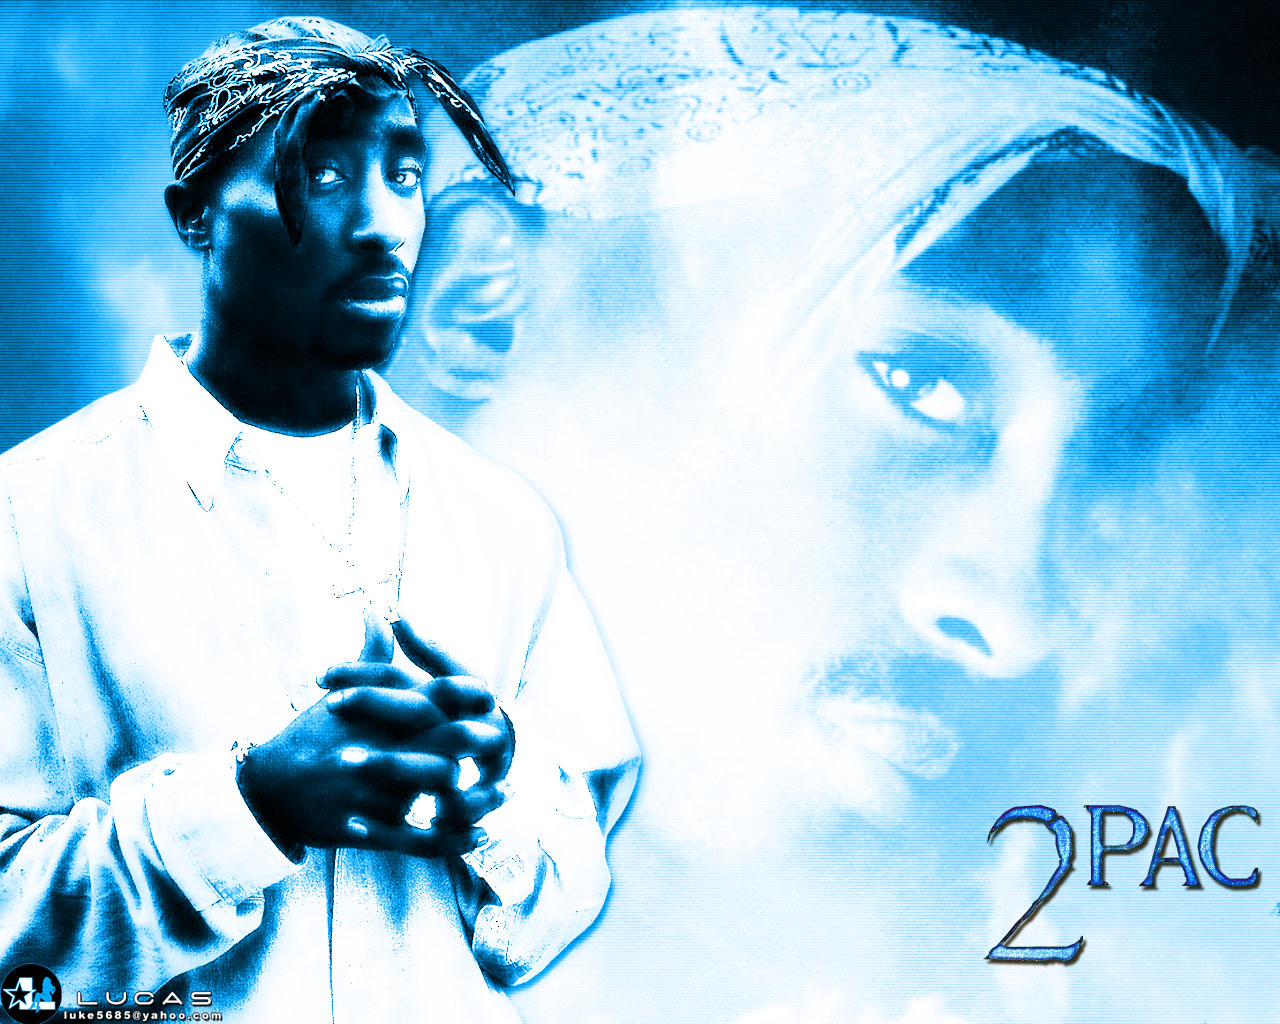 Download High quality 2pac wallpaper / Celebrities Male / 1280x1024